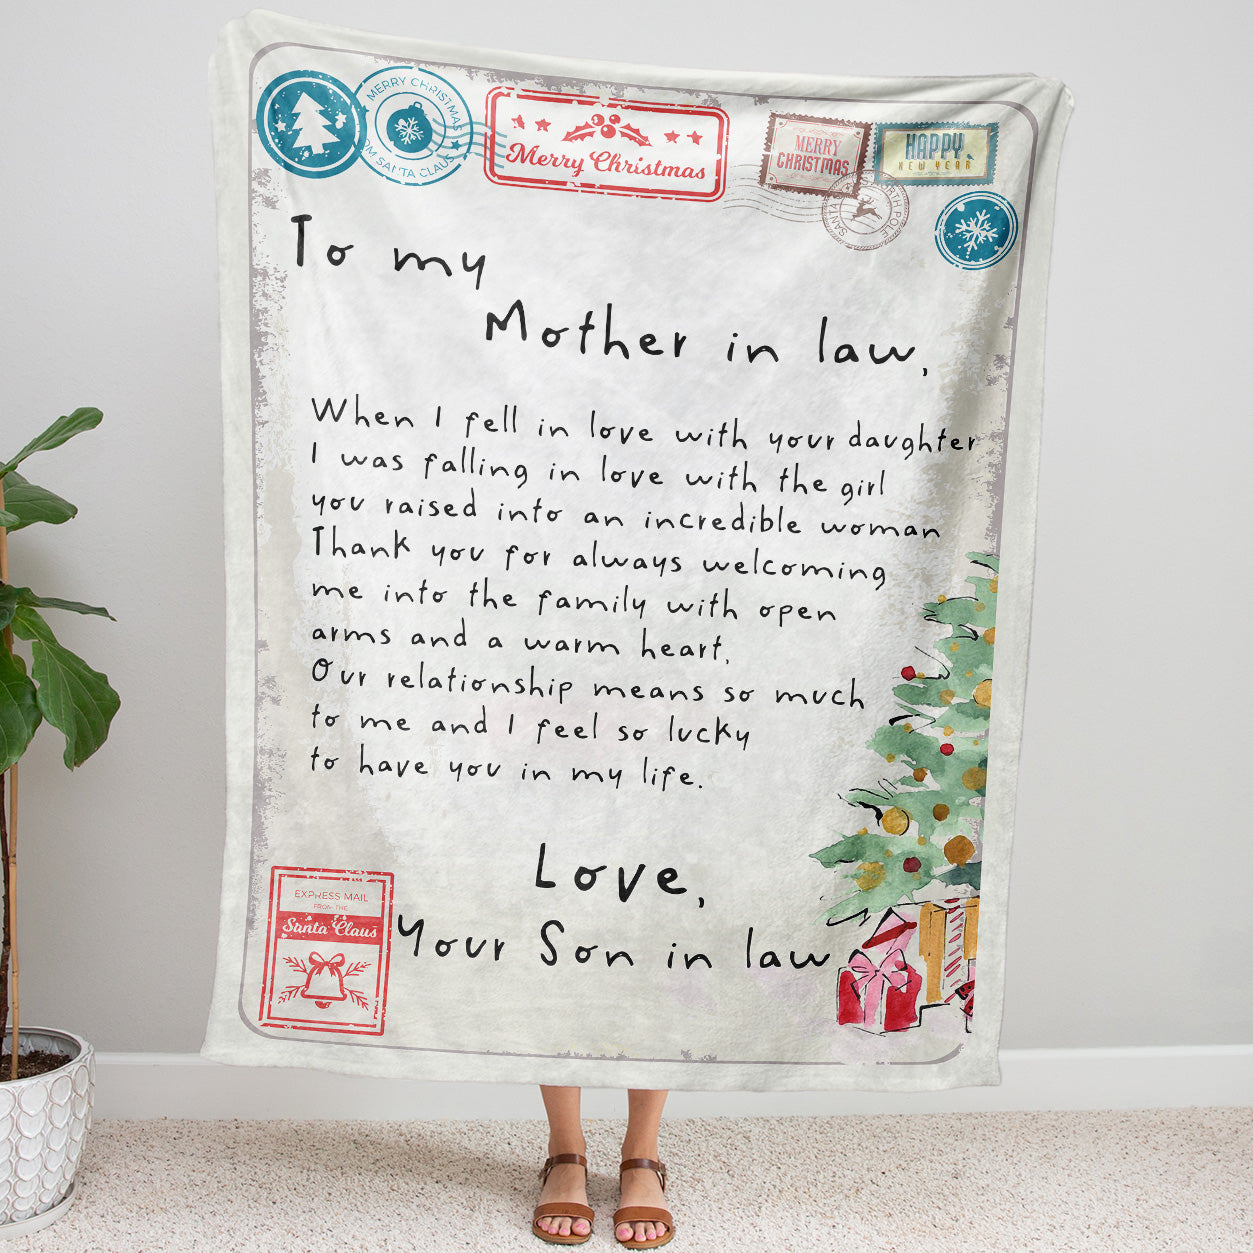 Blanket Christmas Gift ideas for Mother in Law from Son in Law Customize Personalize Love with Your Daughter 20121101 - Sherpa Blanket